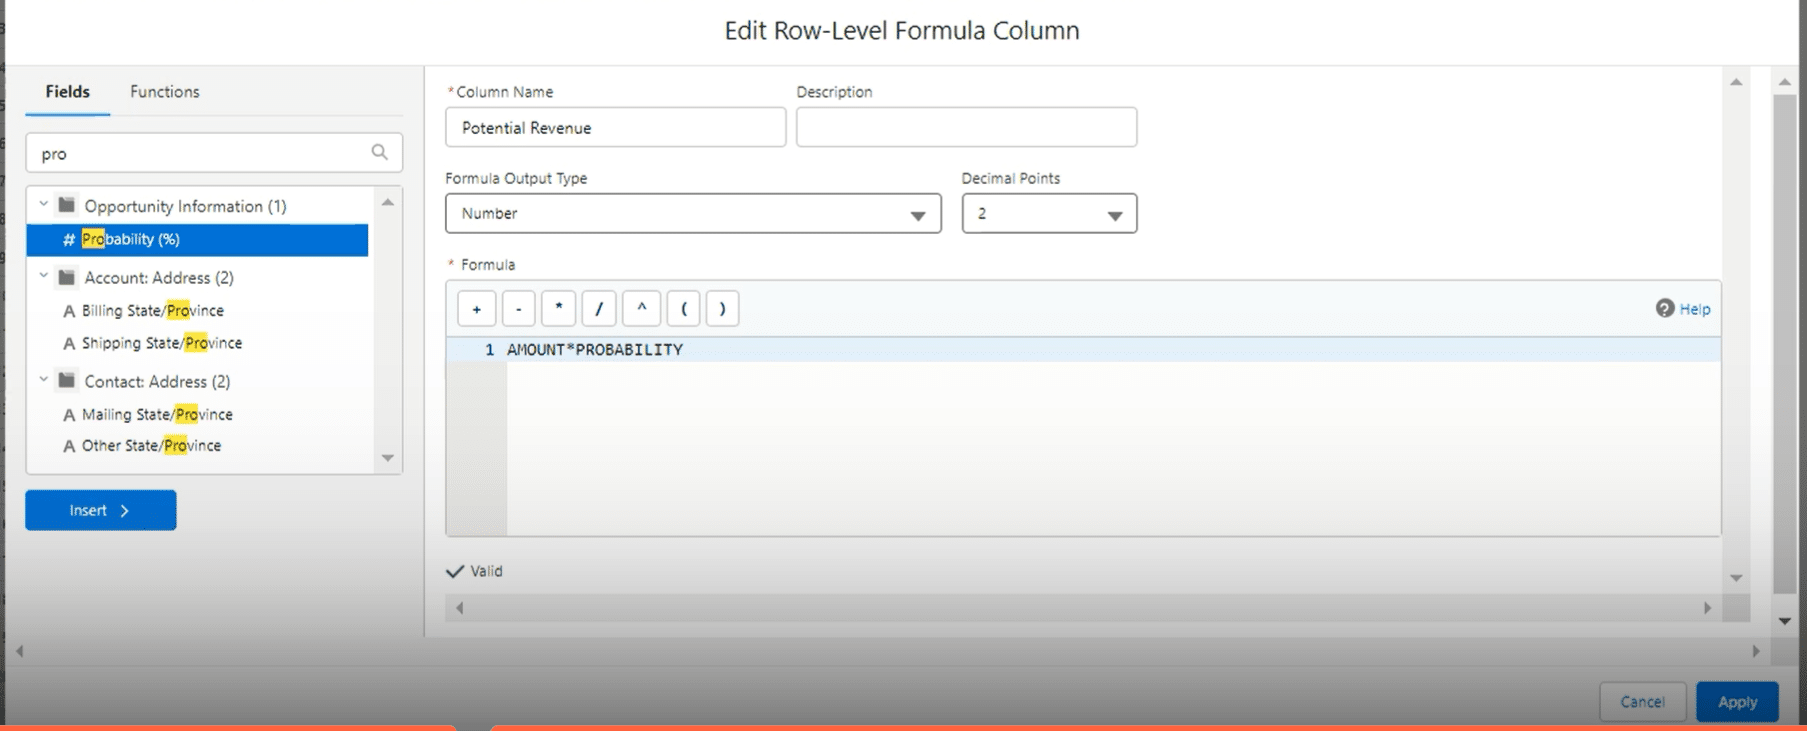 Ensuring the accuracy of row level formulas in Salesforce reports before applying, with a system performance balance by limiting up to 5 formulas per report.